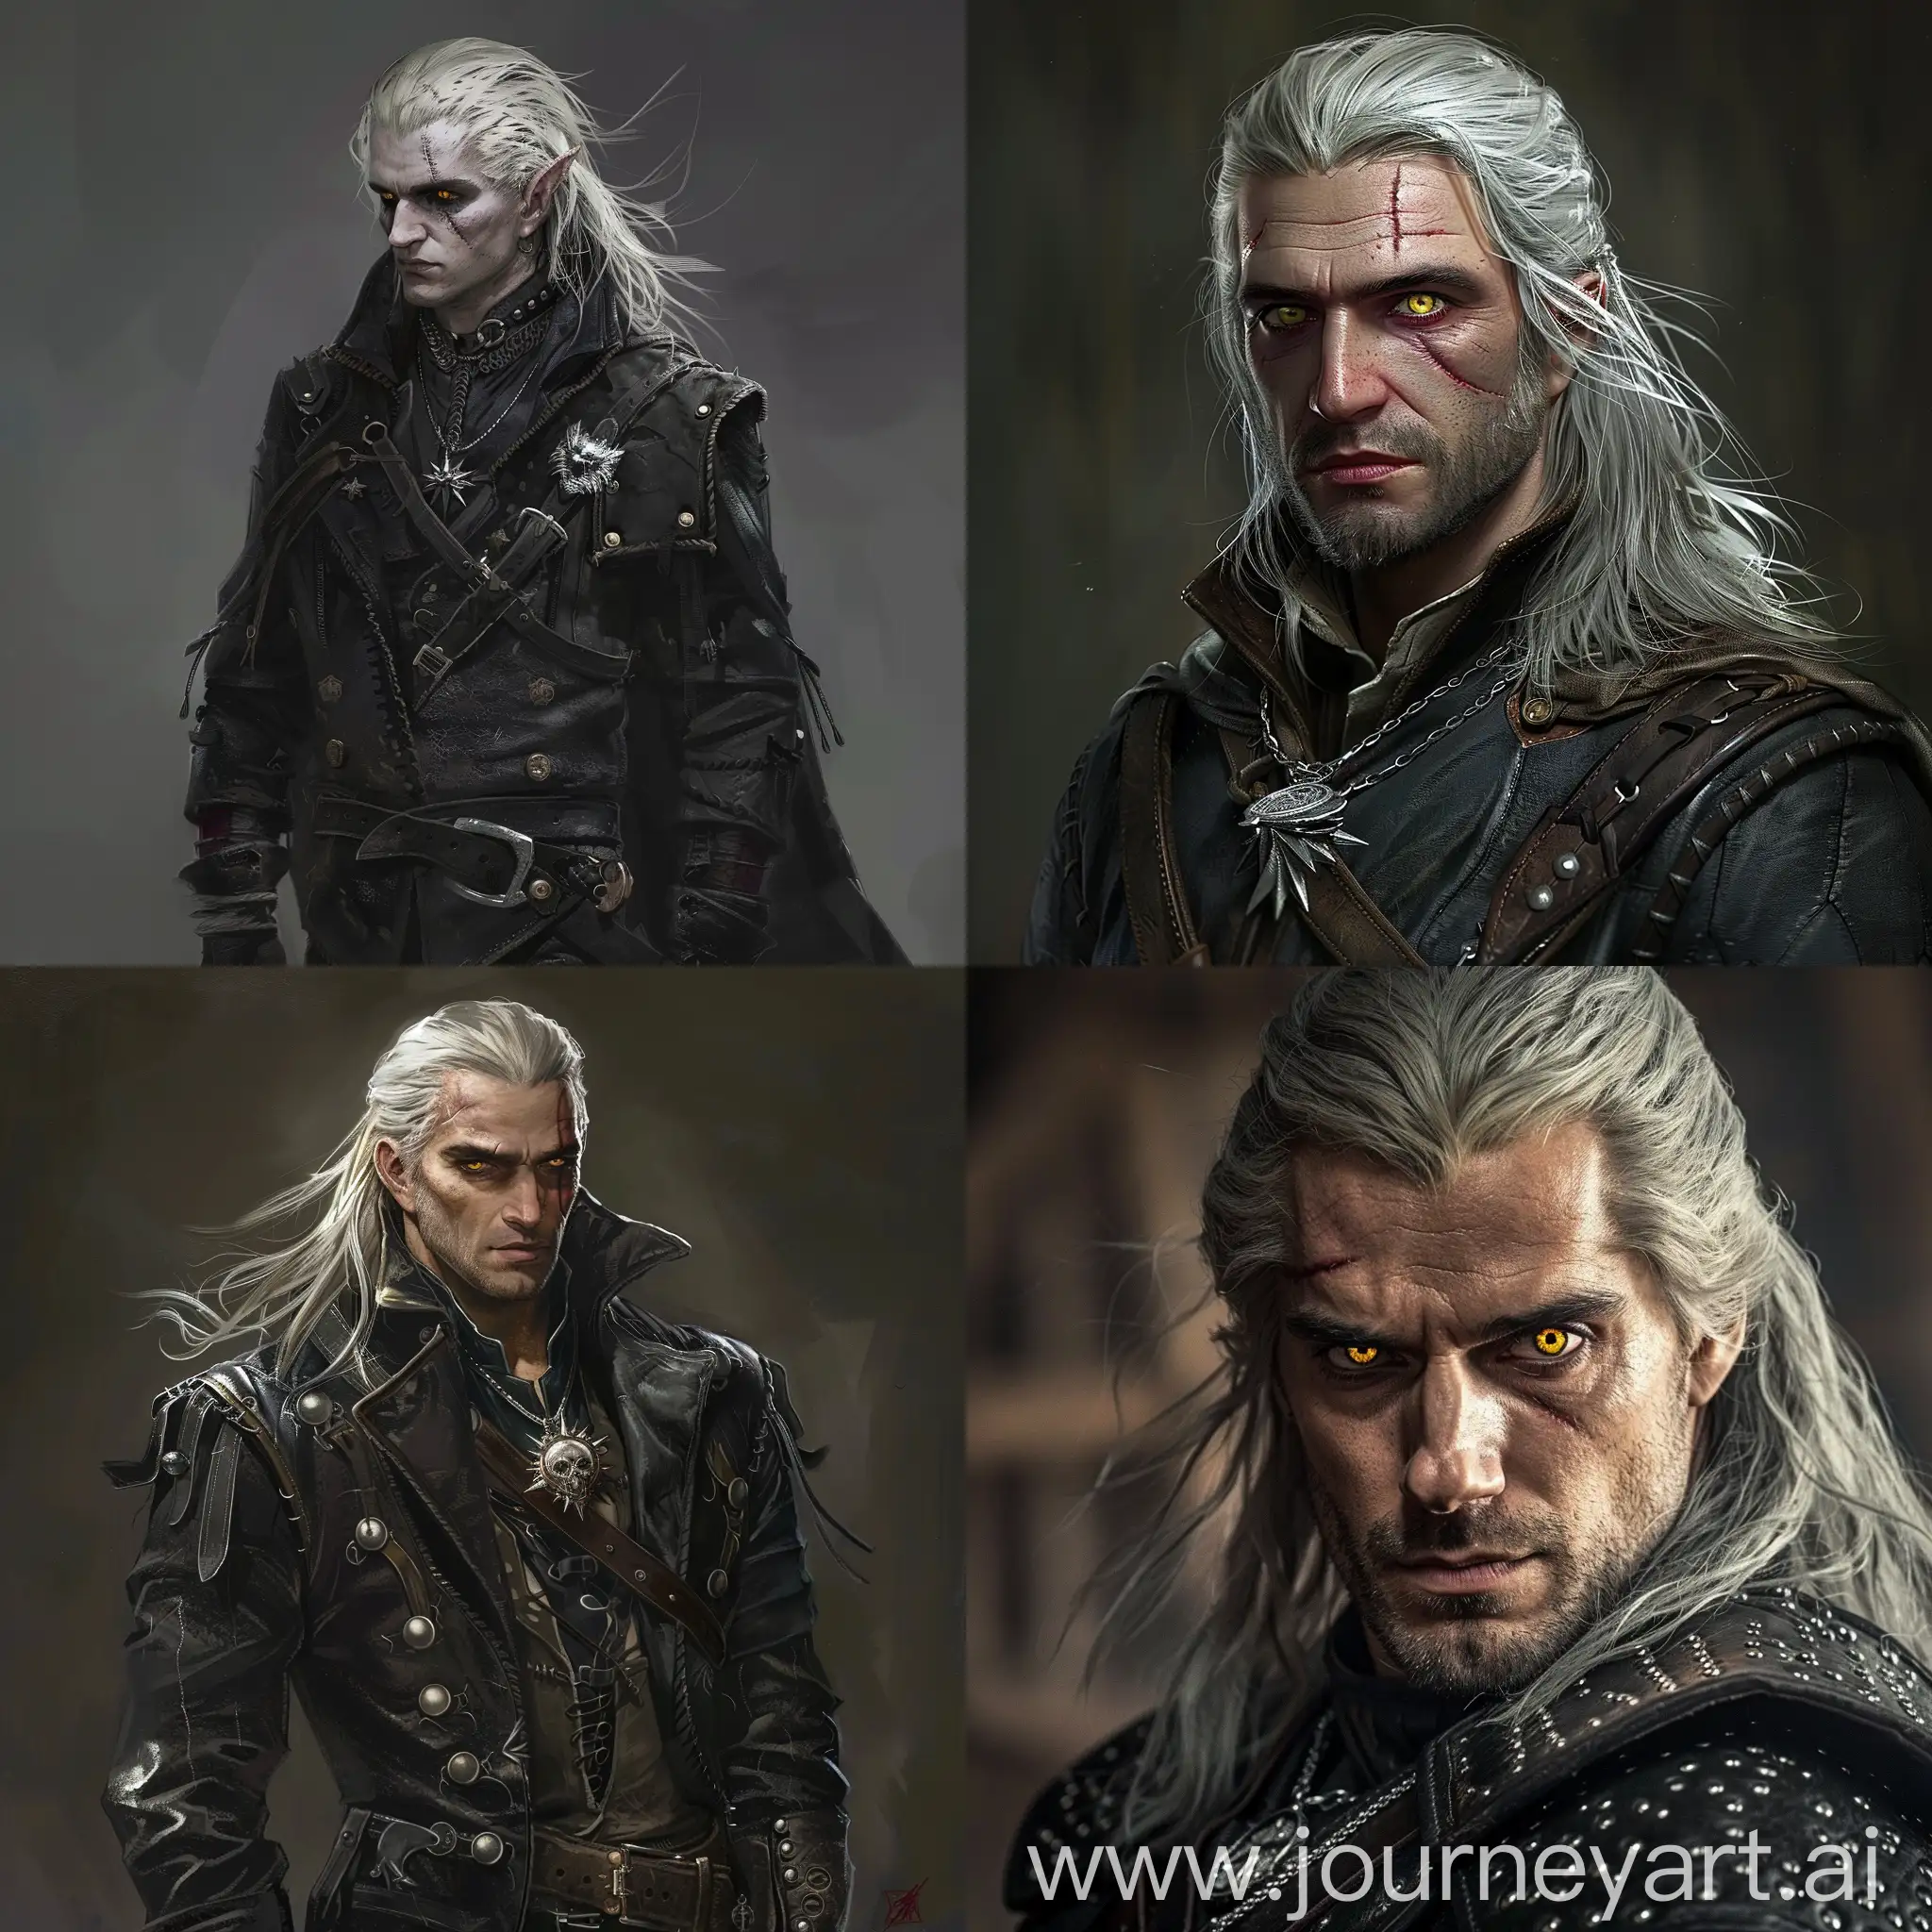 Mysterious-Fantasy-Warrior-with-Grey-Hair-and-Silver-Riveted-Jacket